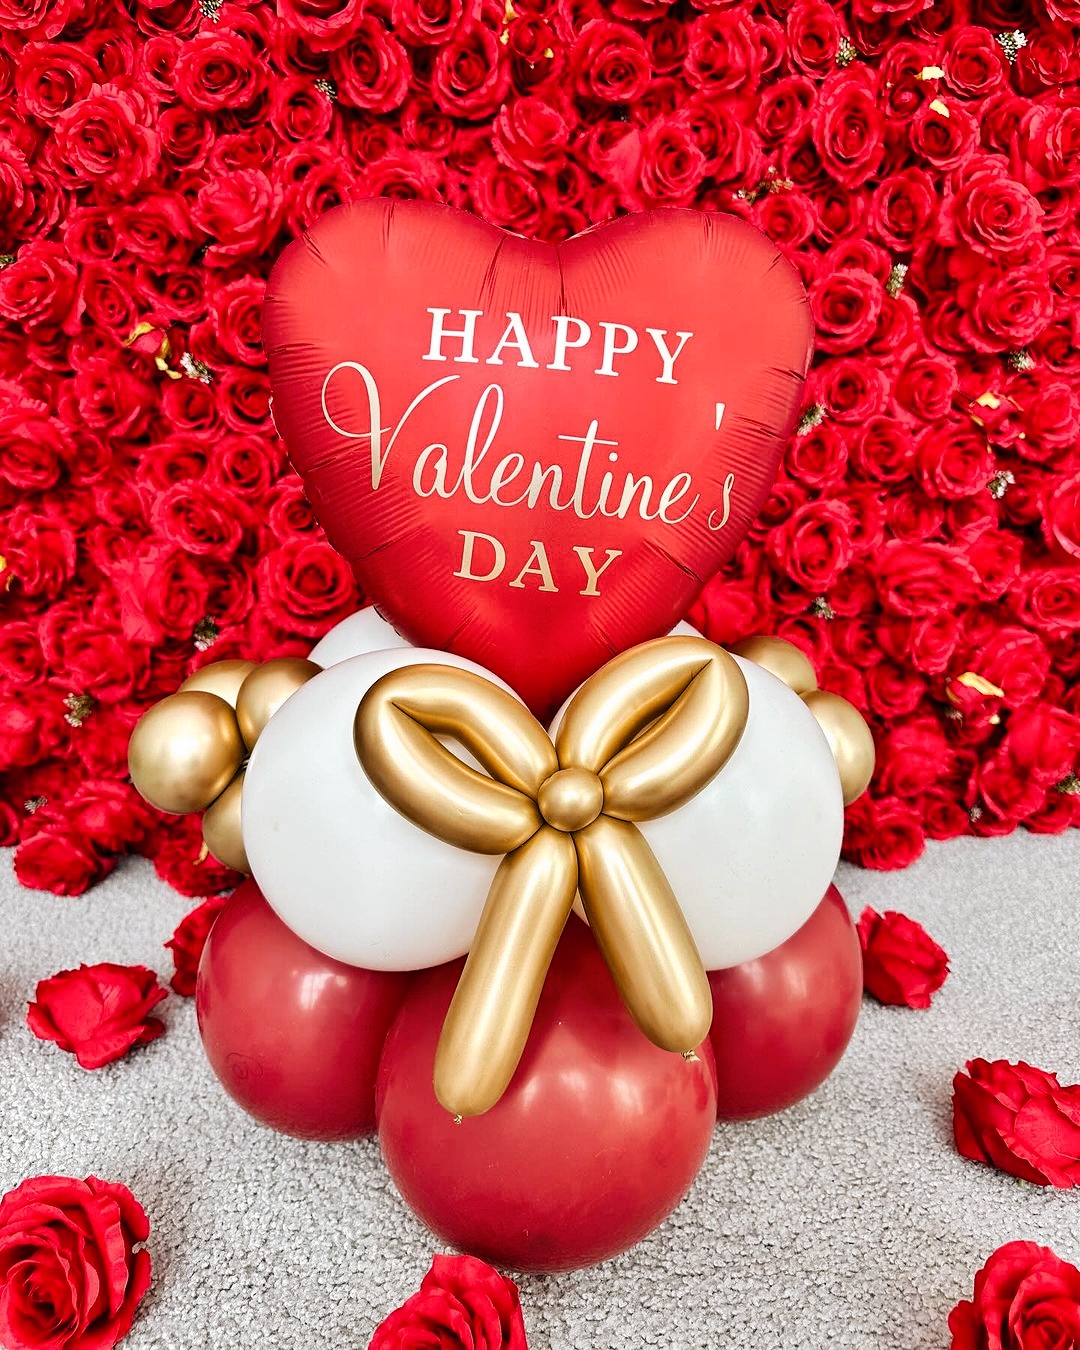 Valentines Day Images For Lovers